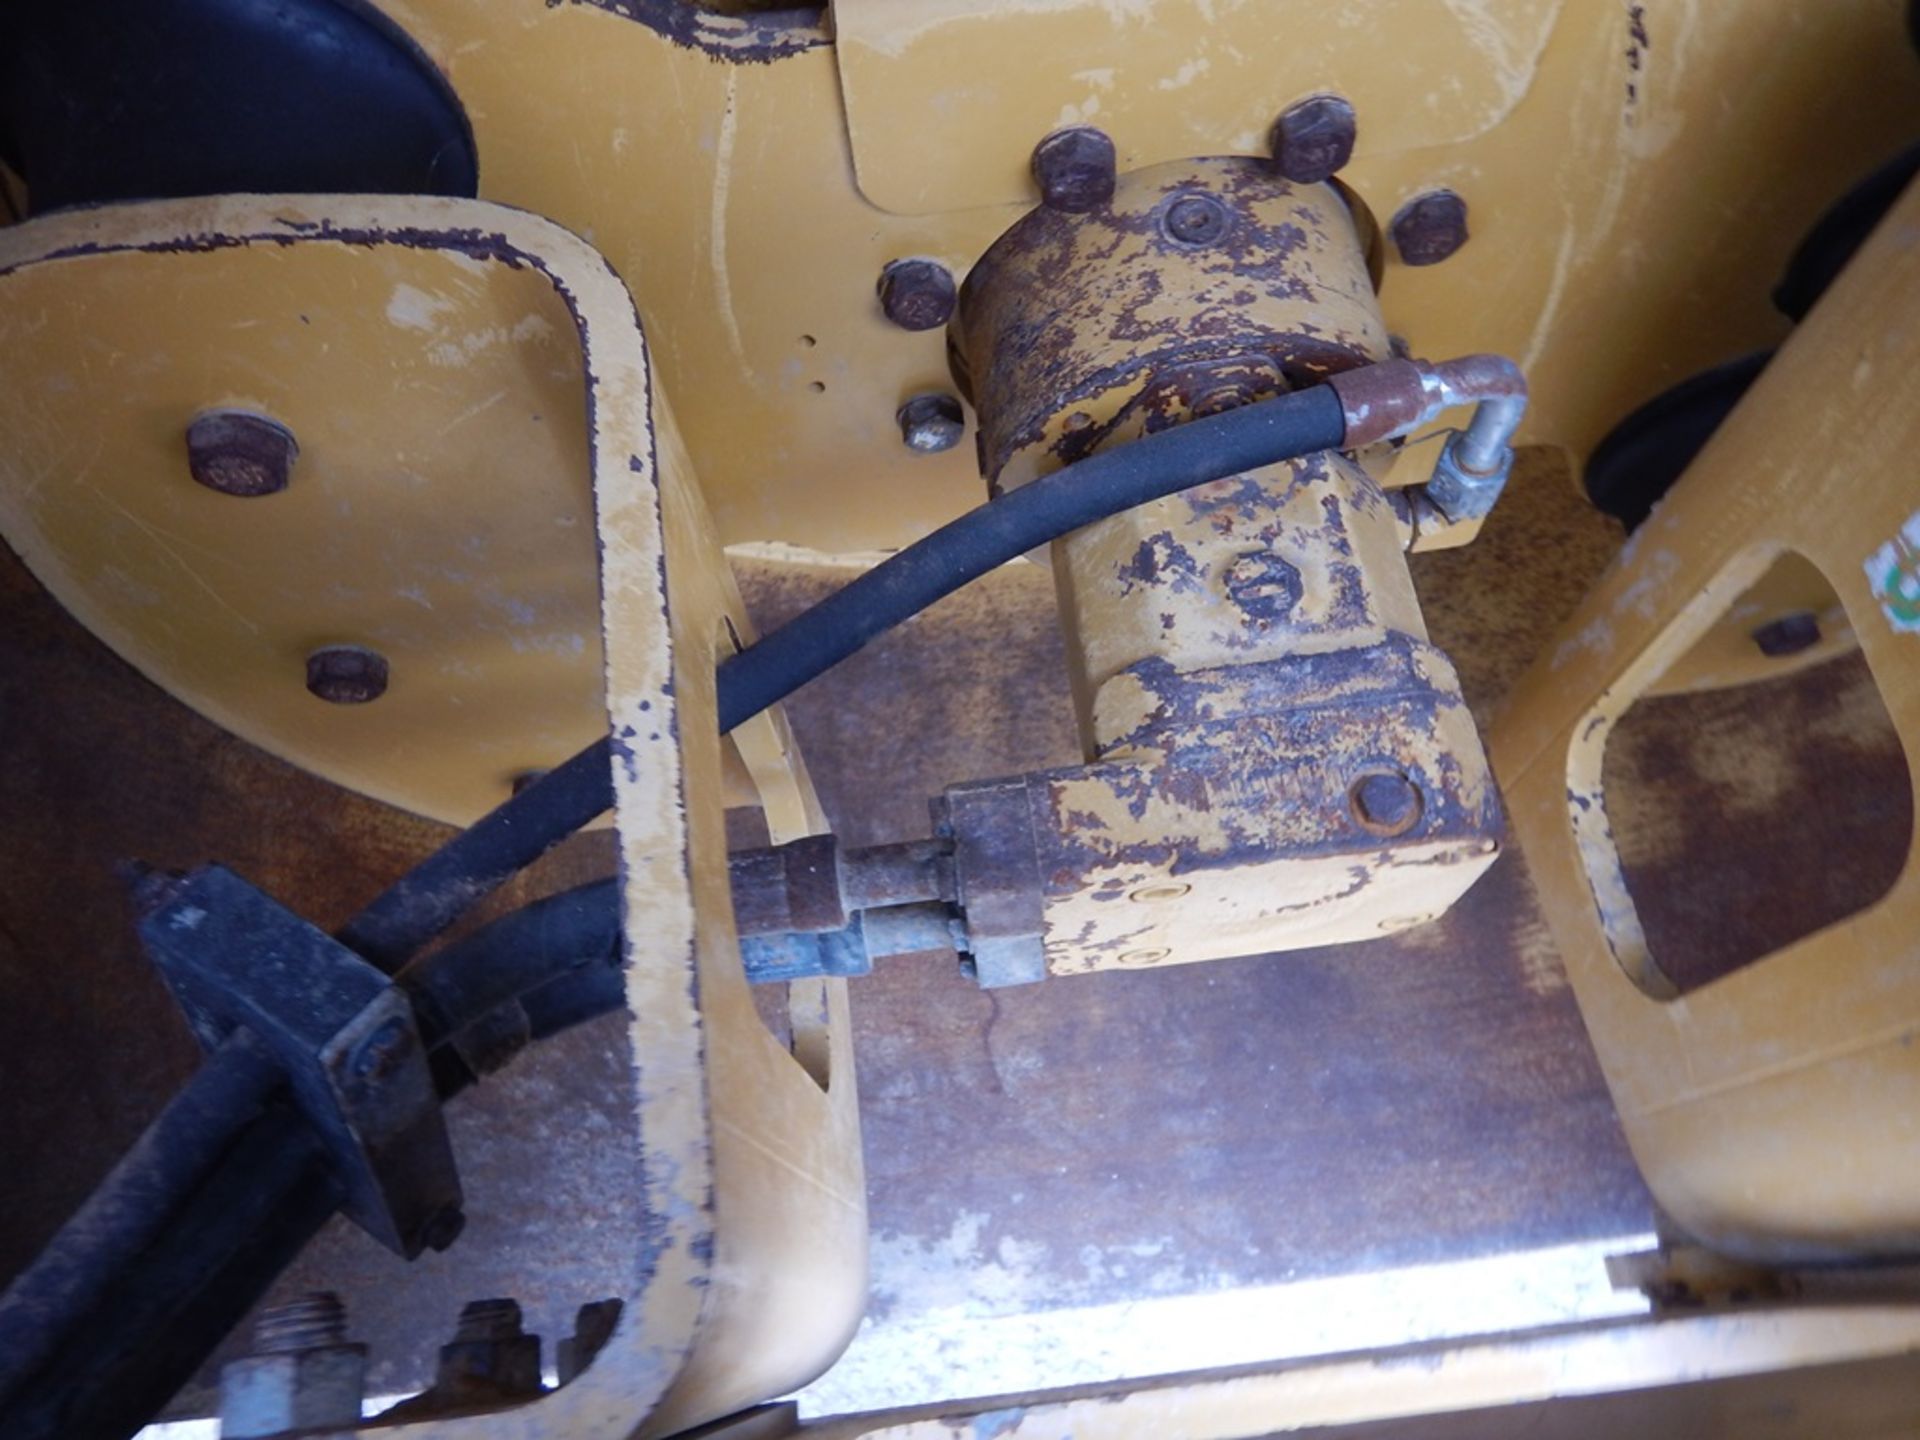 2013 Caterpillar Model CP56B Pad Foot Compactor 2,449 Hours | 84" PAD FOOT COMPACTOR, VIBRATORY DRUM - Image 8 of 12